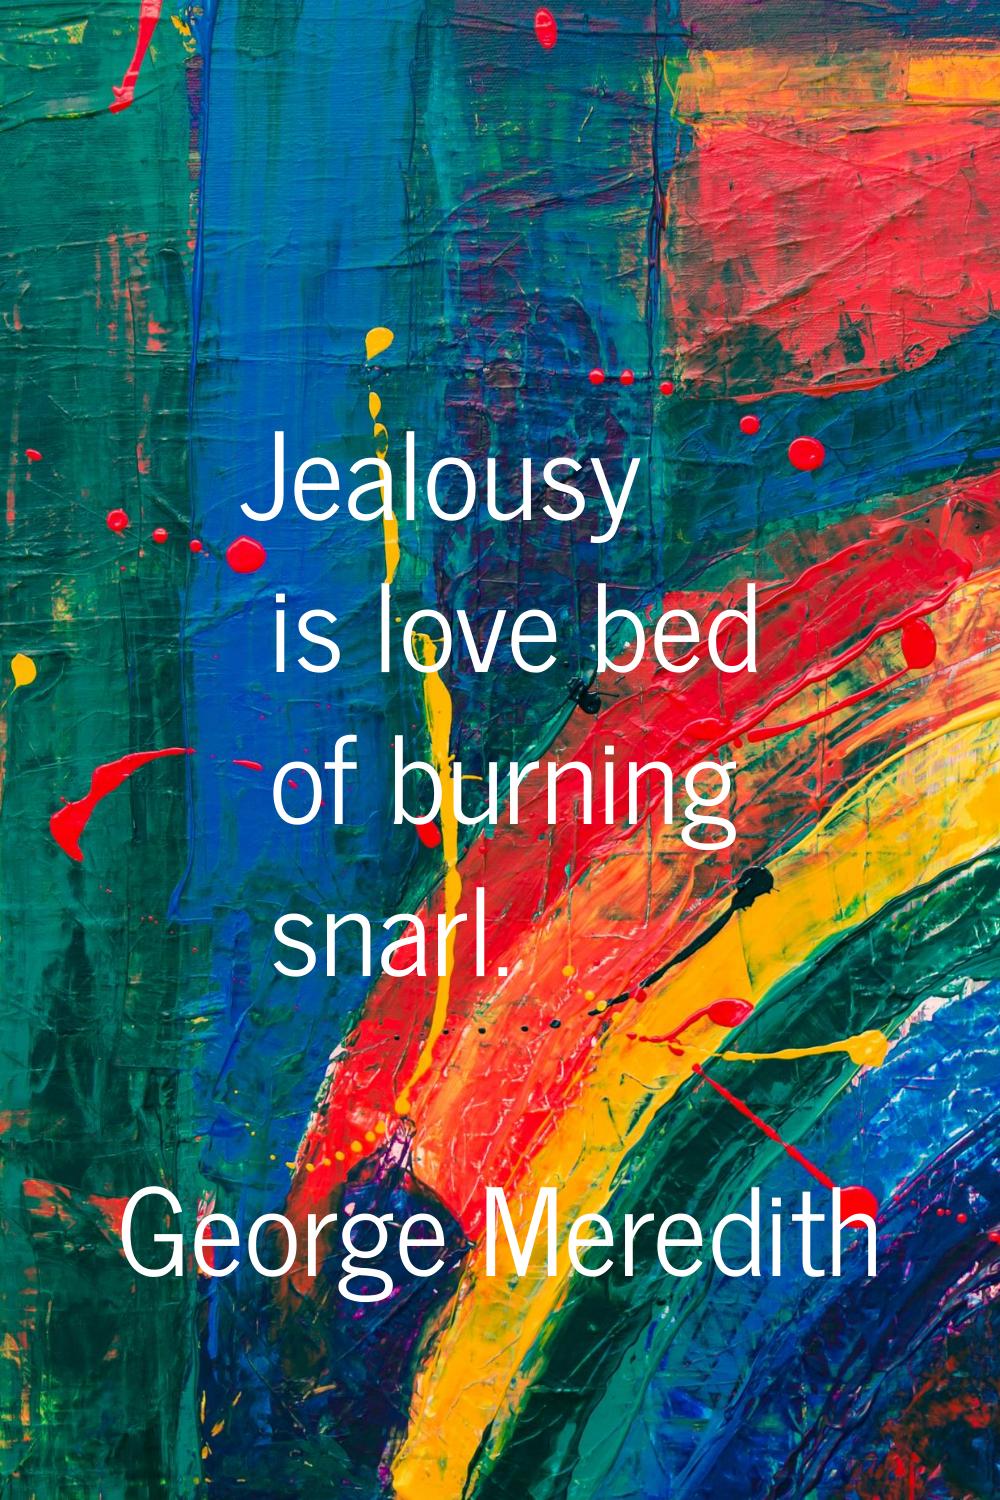 Jealousy is love bed of burning snarl.